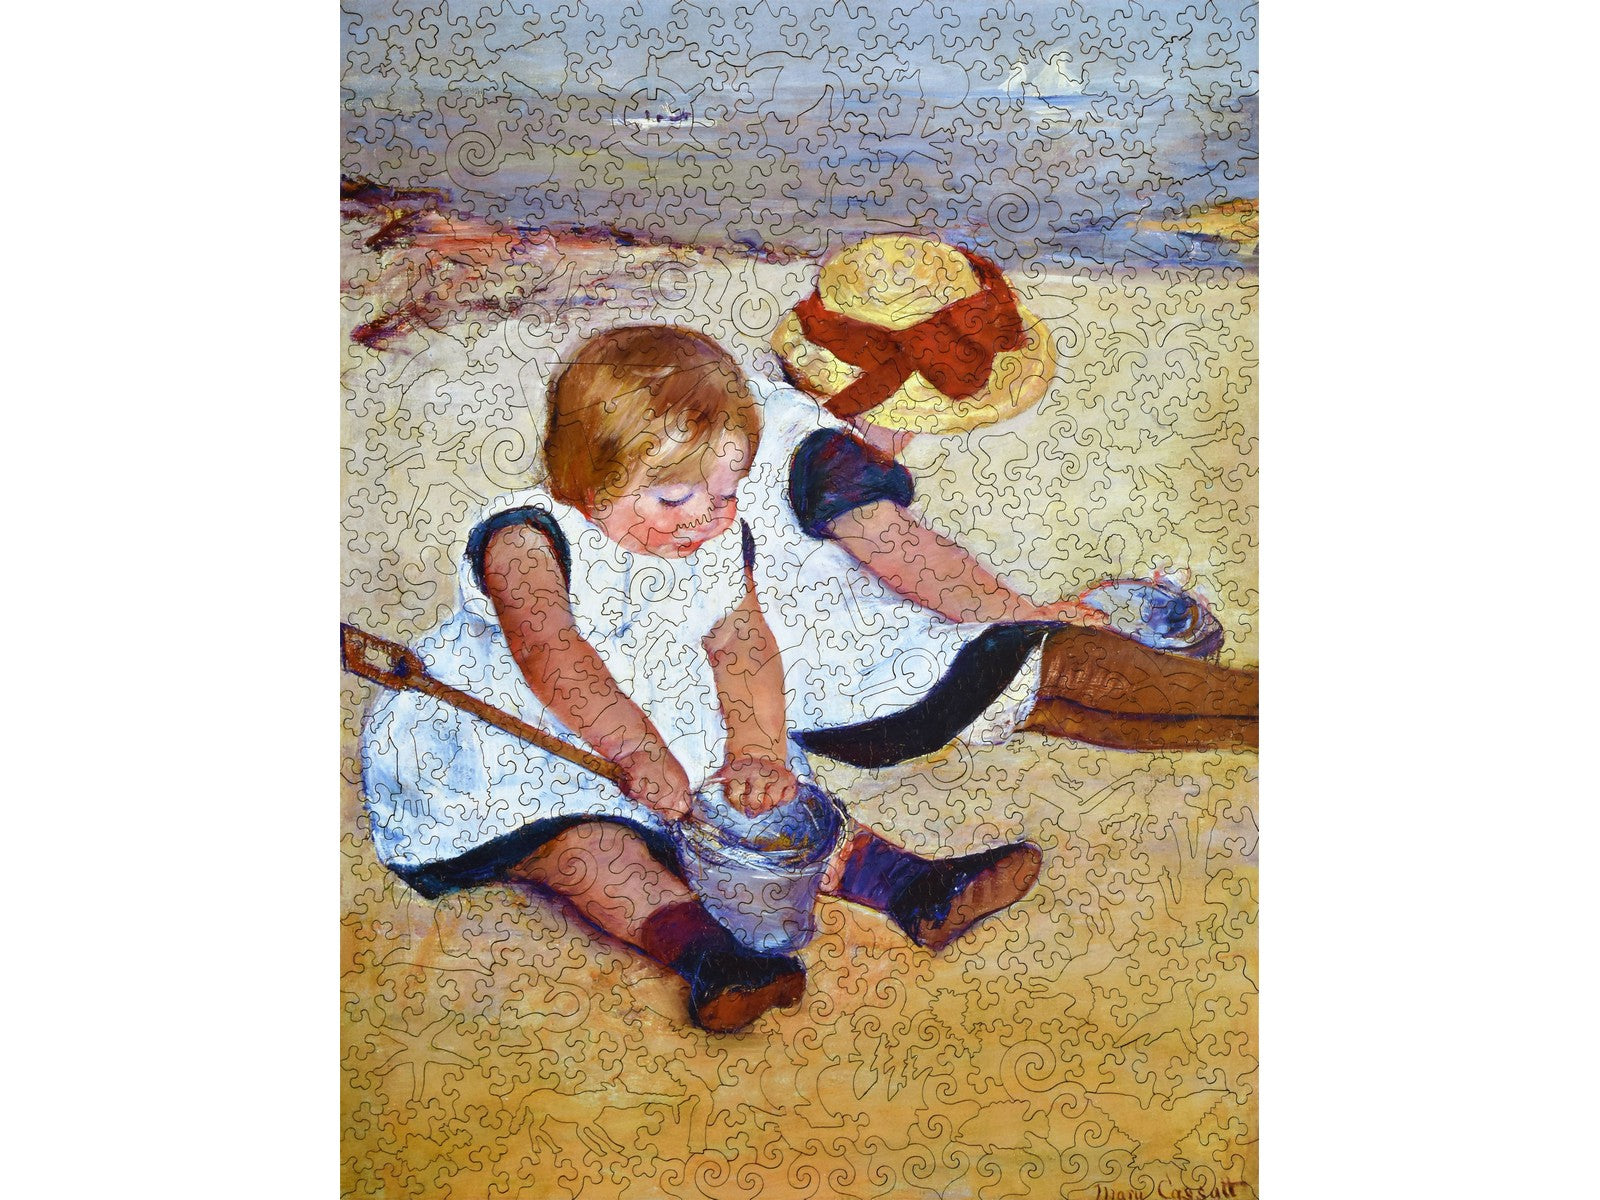 The front of the puzzle, Children Playing on the Beach, which shows two young children playing in the sand.